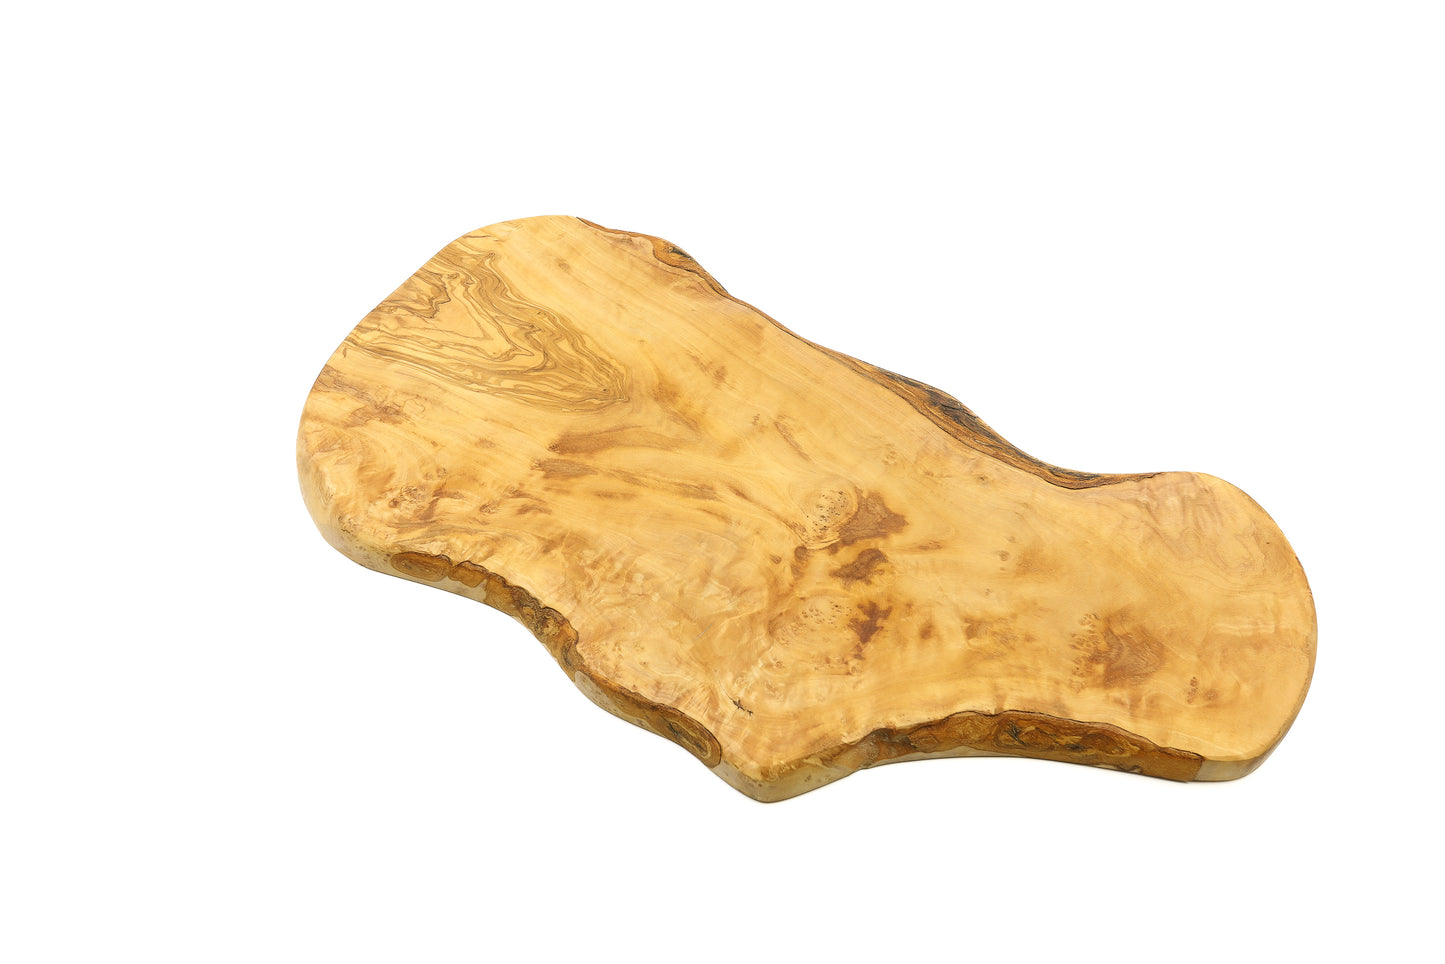 Oversized olive wood cutting and serving board for your kitchen